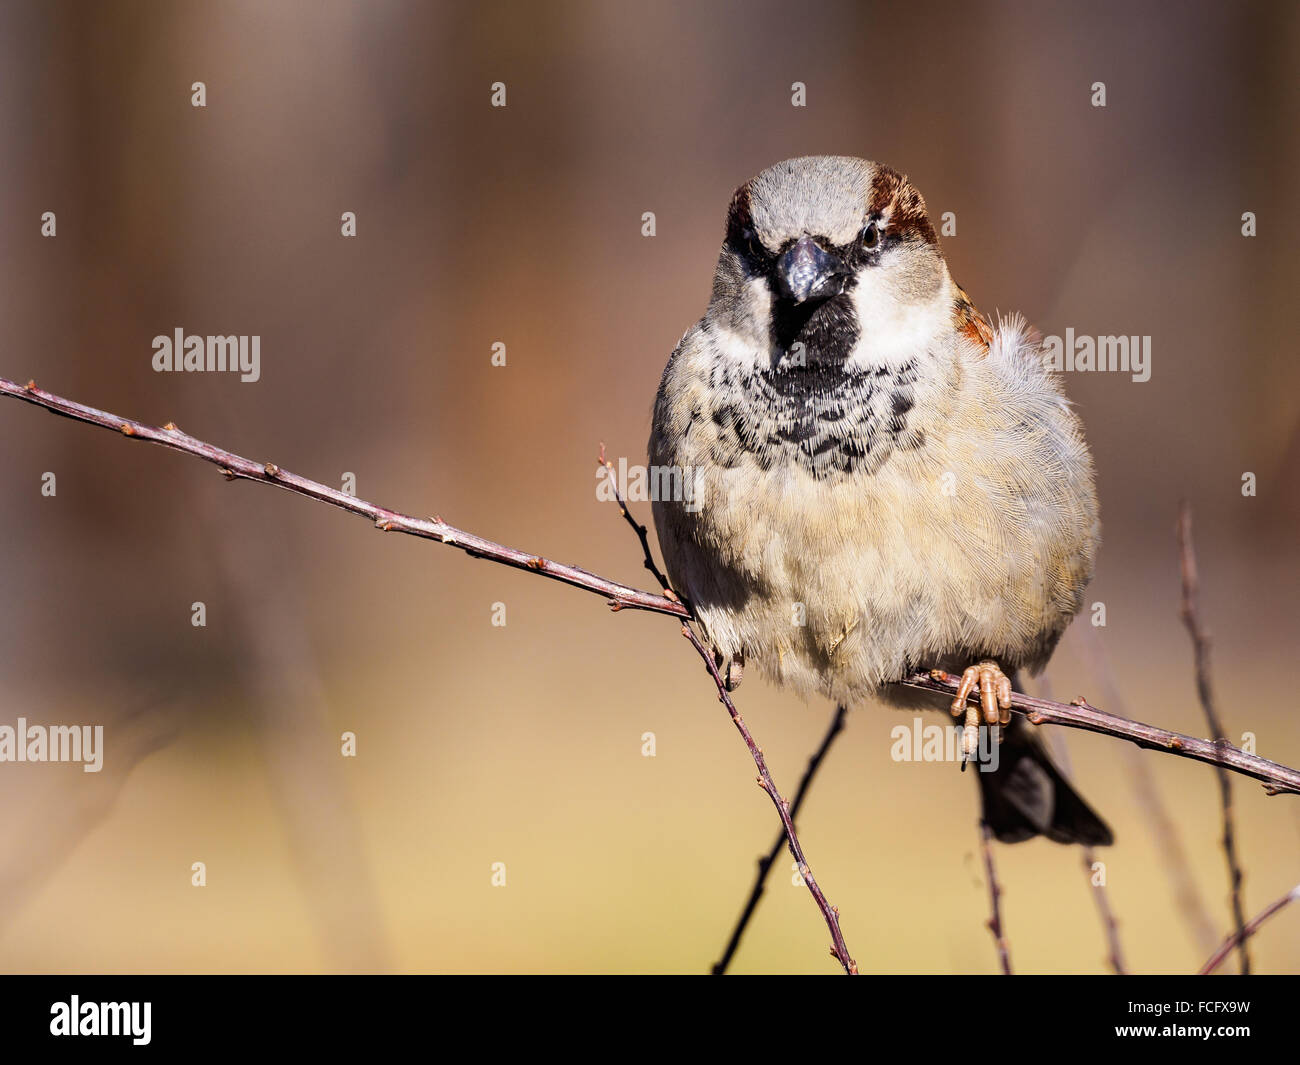 A sparrow on a branch Stock Photo